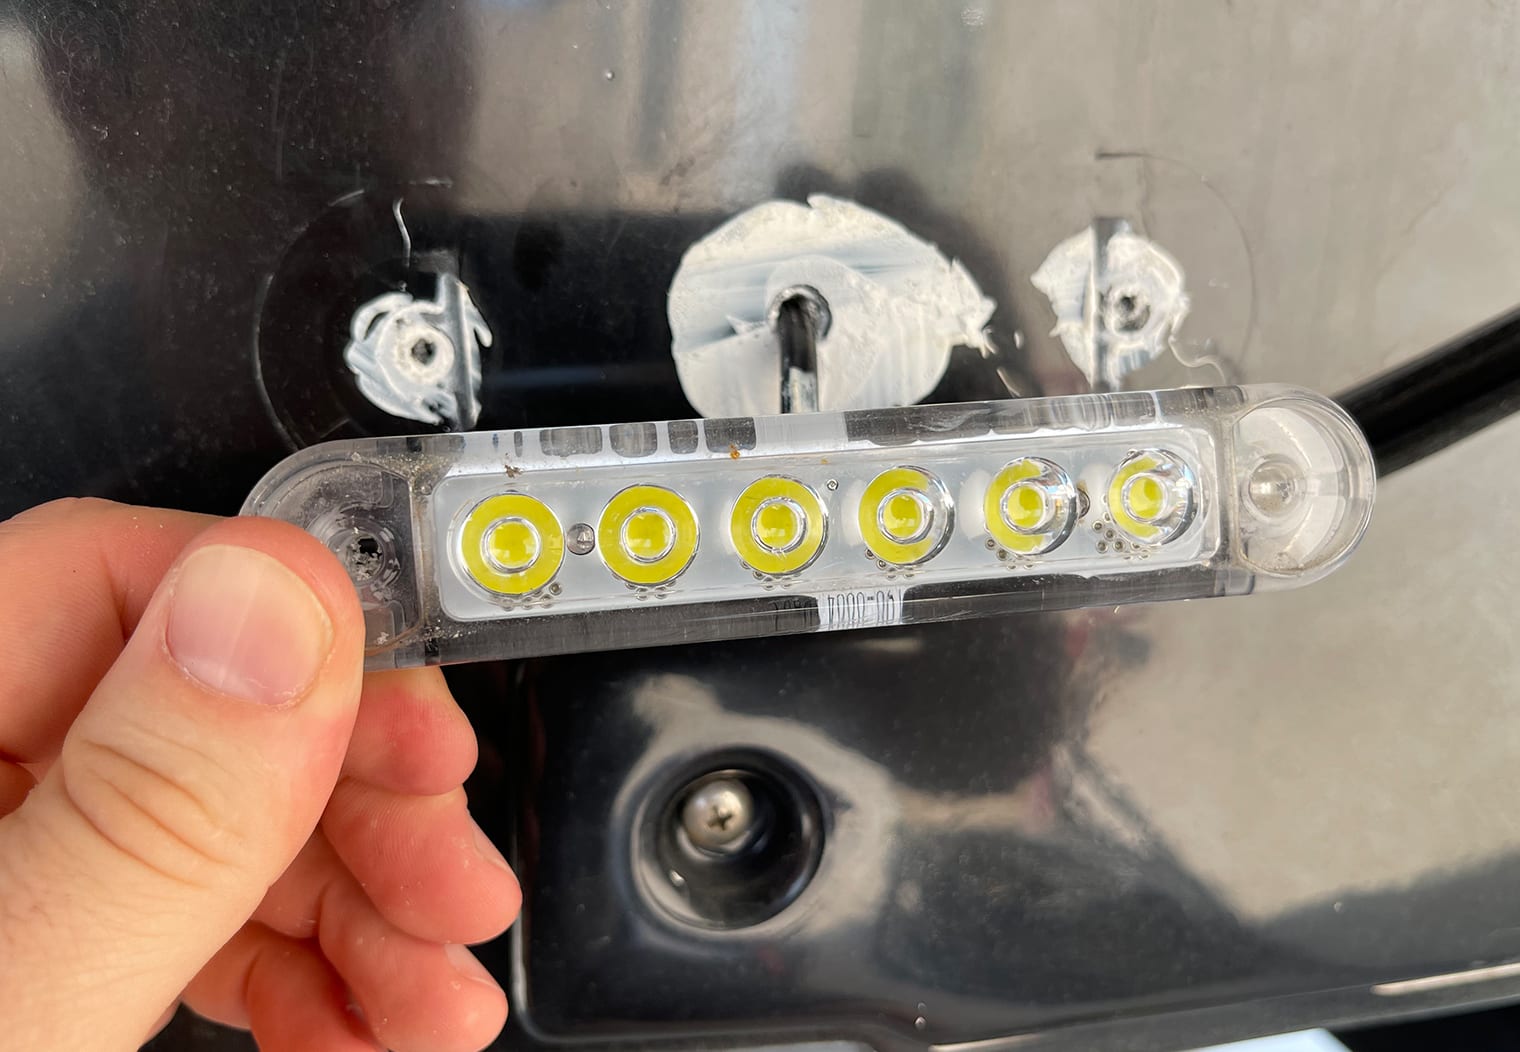 Removing the starboard OEM underwater LED on a Nautique G23